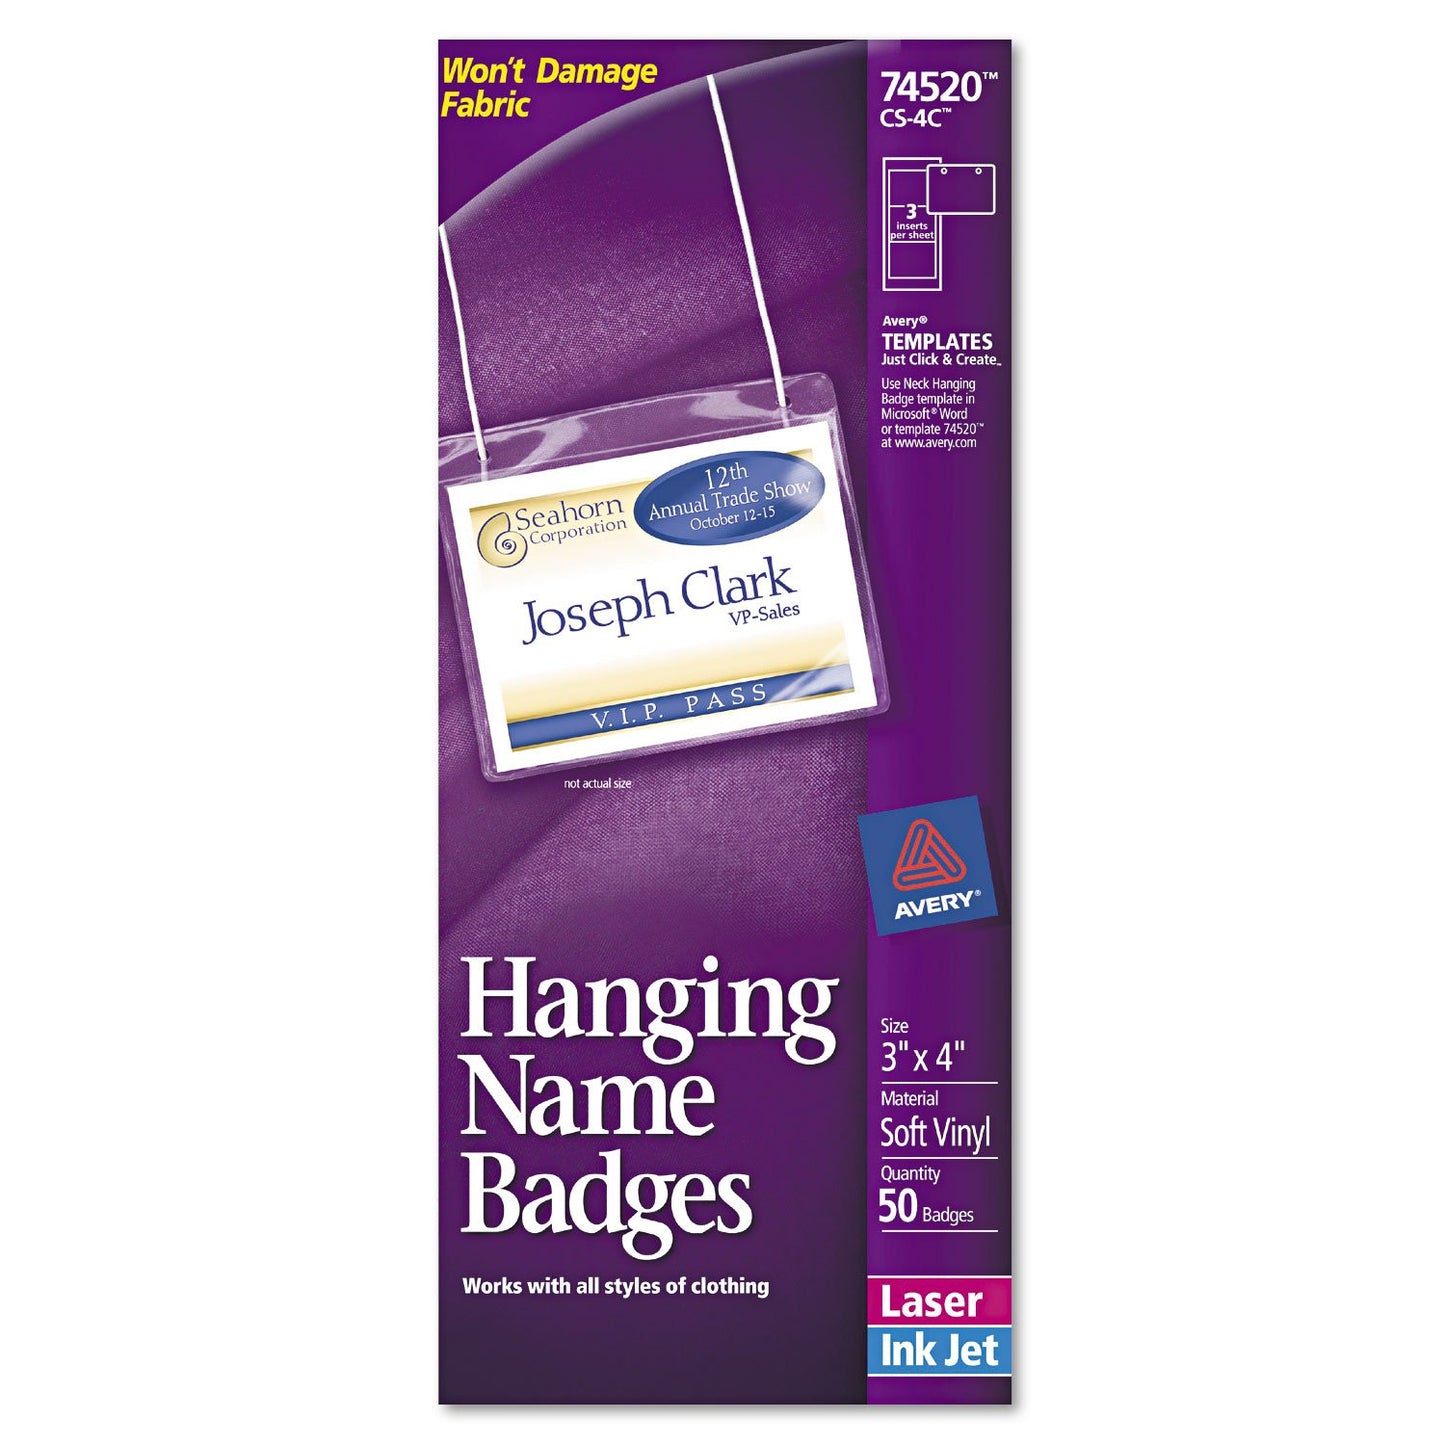 Avery Hanging Style Name Badge Holders with Inserts, 3 x 4, 50/Box (AVE74520)